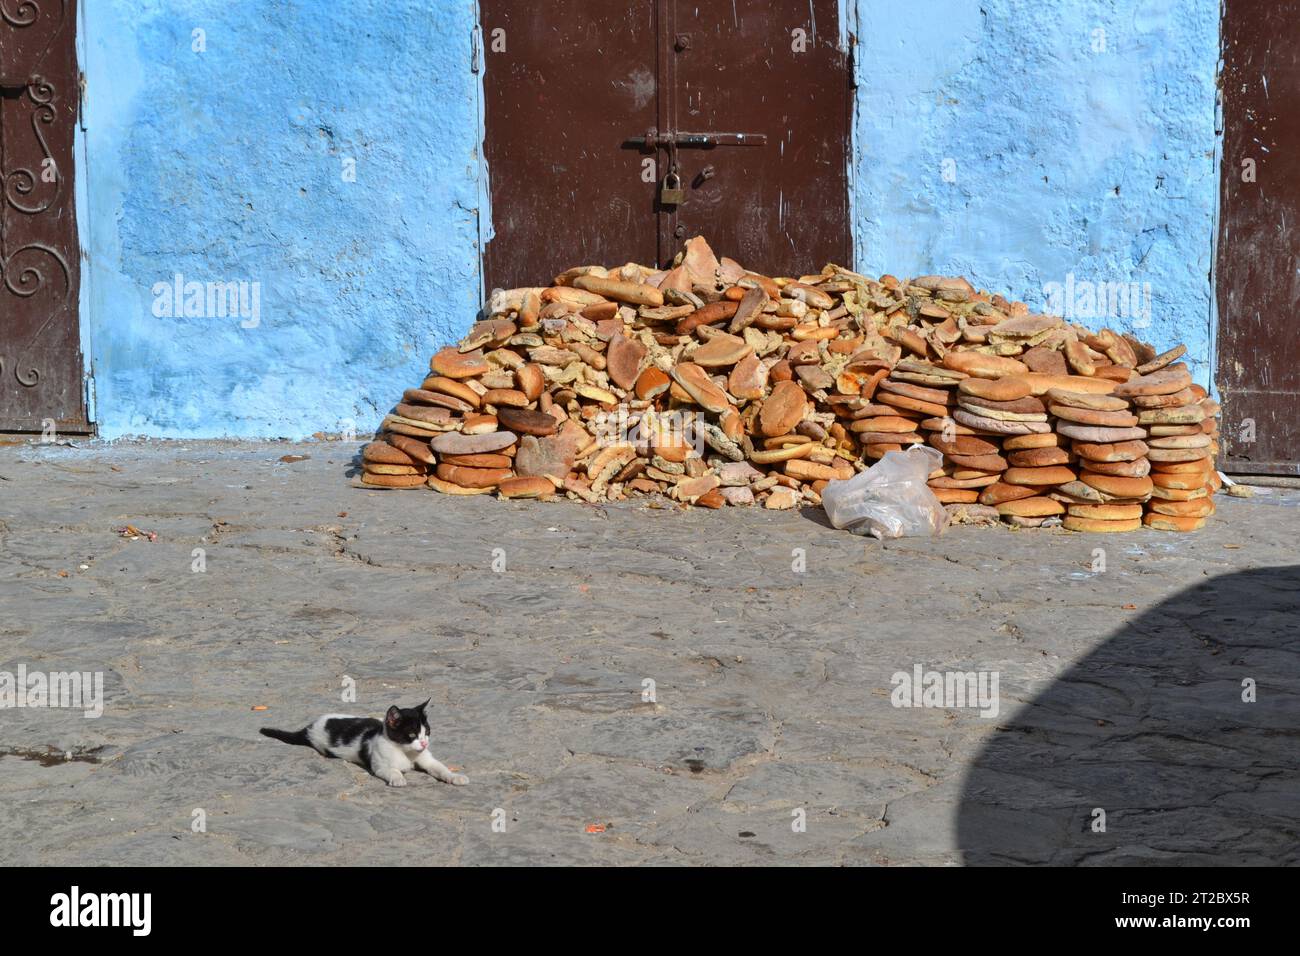 Food waste with discarded old bread and a stray cat on a street in the old city of Tangier, Morocco. Stock Photo